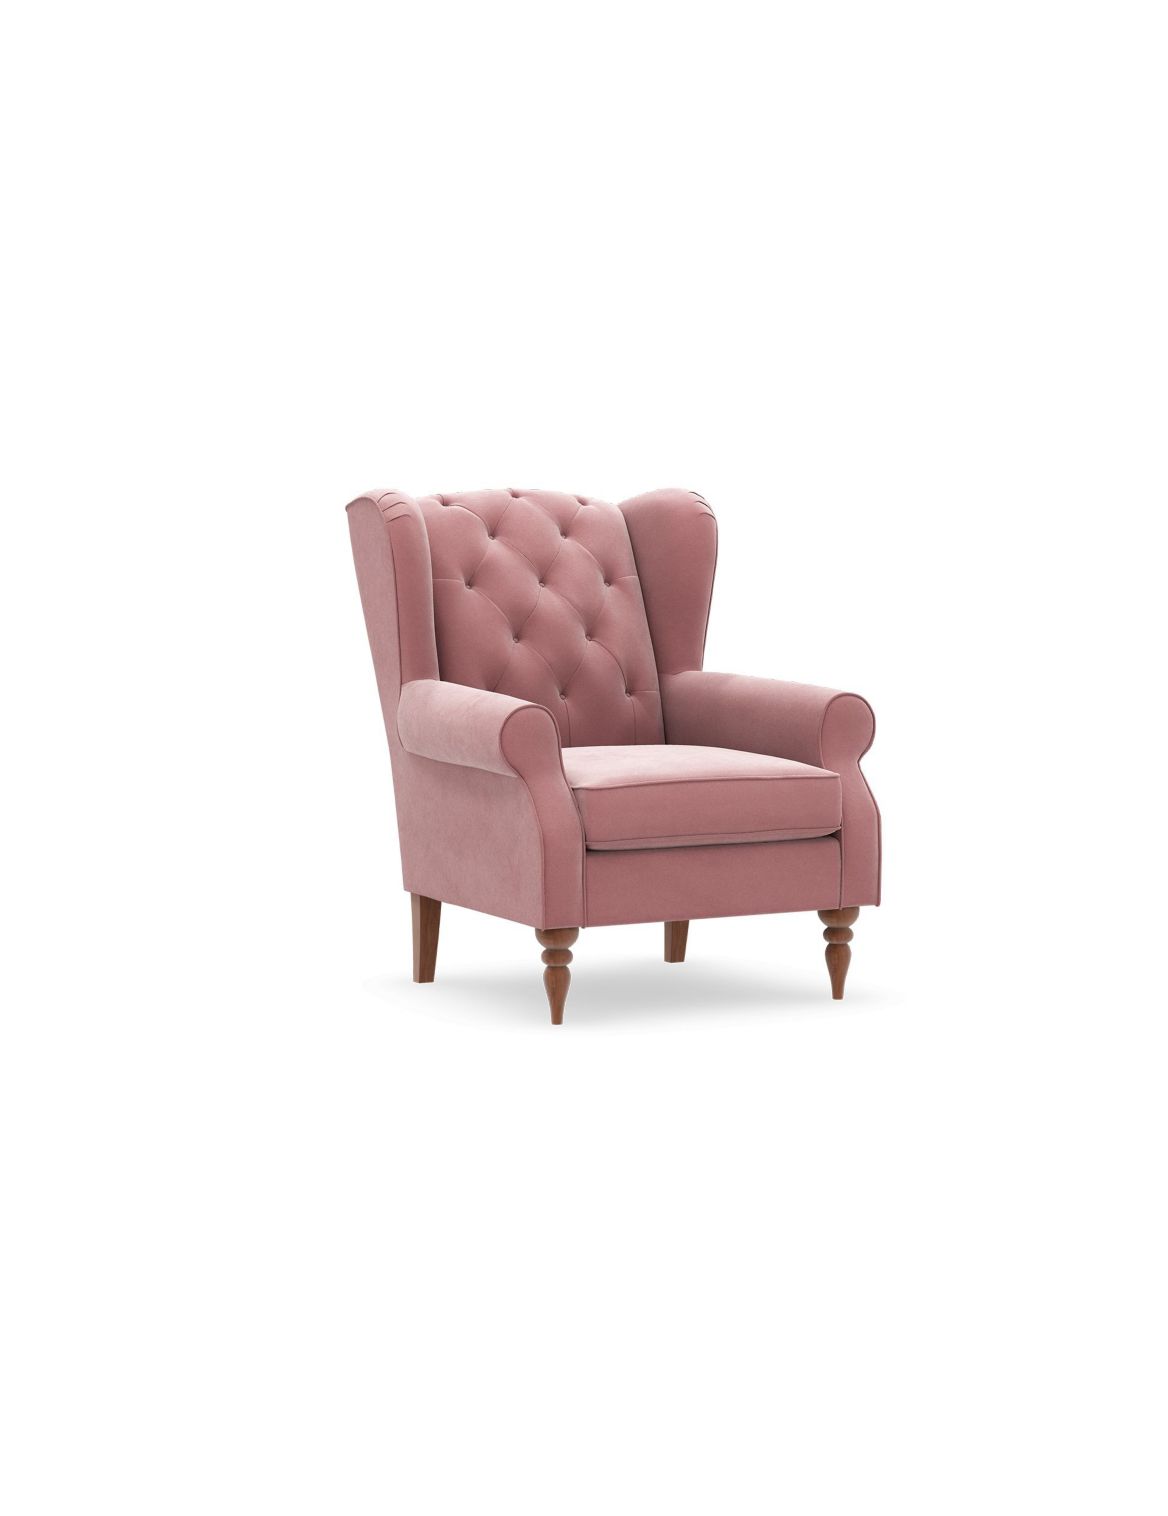 Highland Button Small Armchair pink